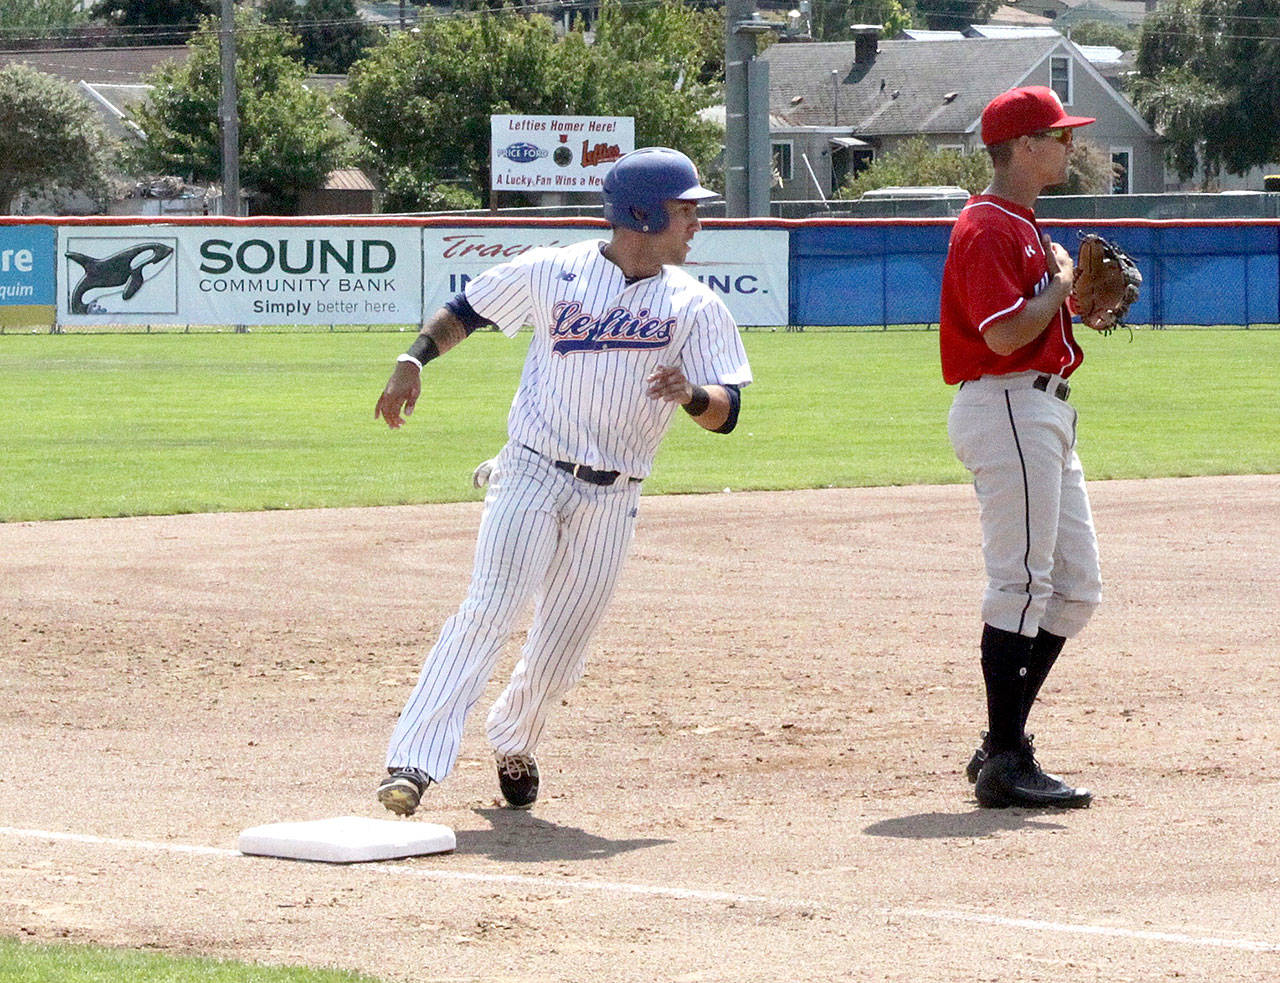 Lefties baserunner Austin Earl rounds third base on the way to home as the Lefties took a 4-0 lead after two innings against Walla Walla on Sunday. They went on to win 7-4. (Dave Logan/for Peninsula Daily News)